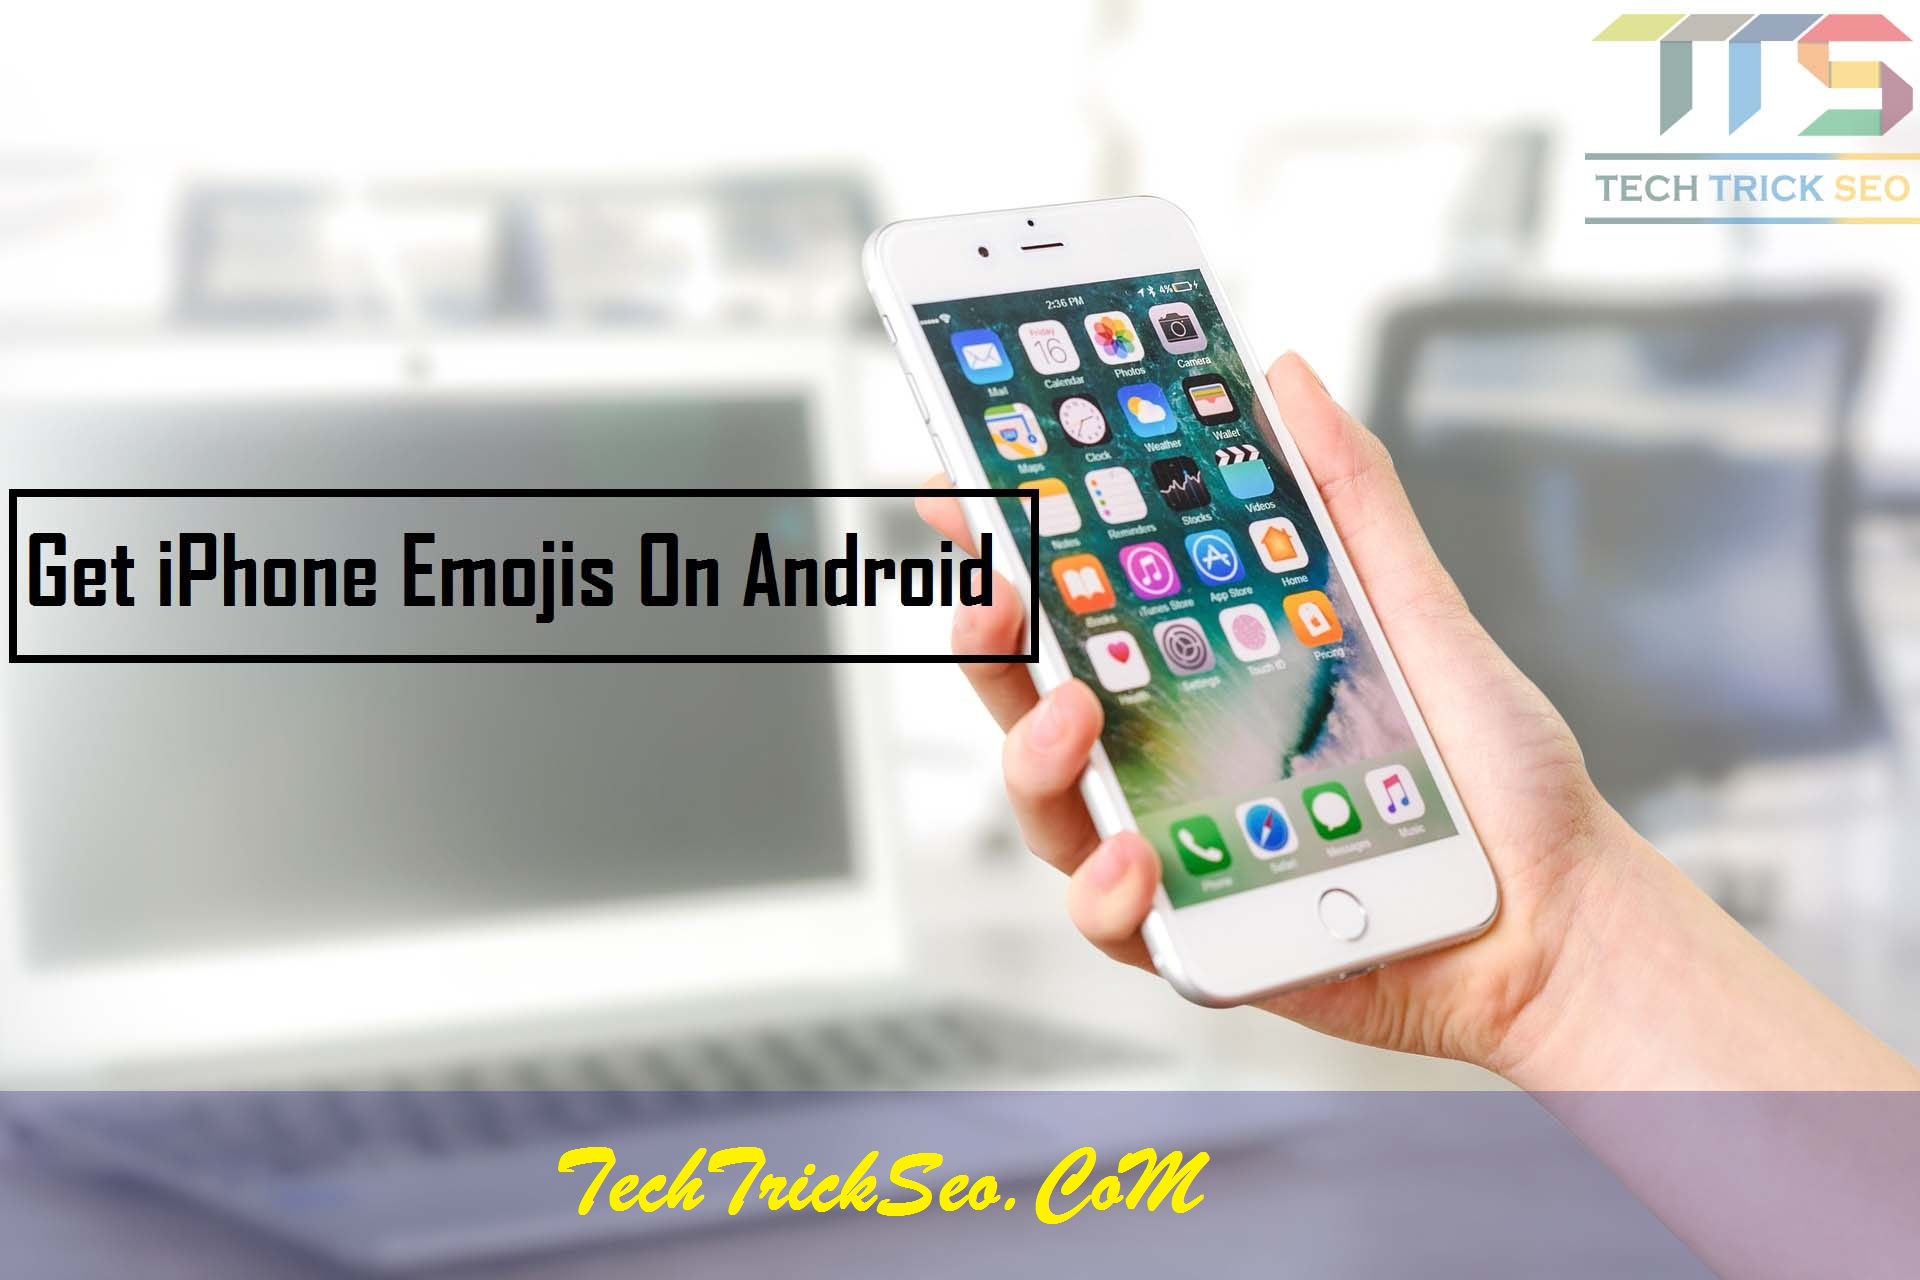 can ios 10.2 emojis be put on android lg g stylo without rooting